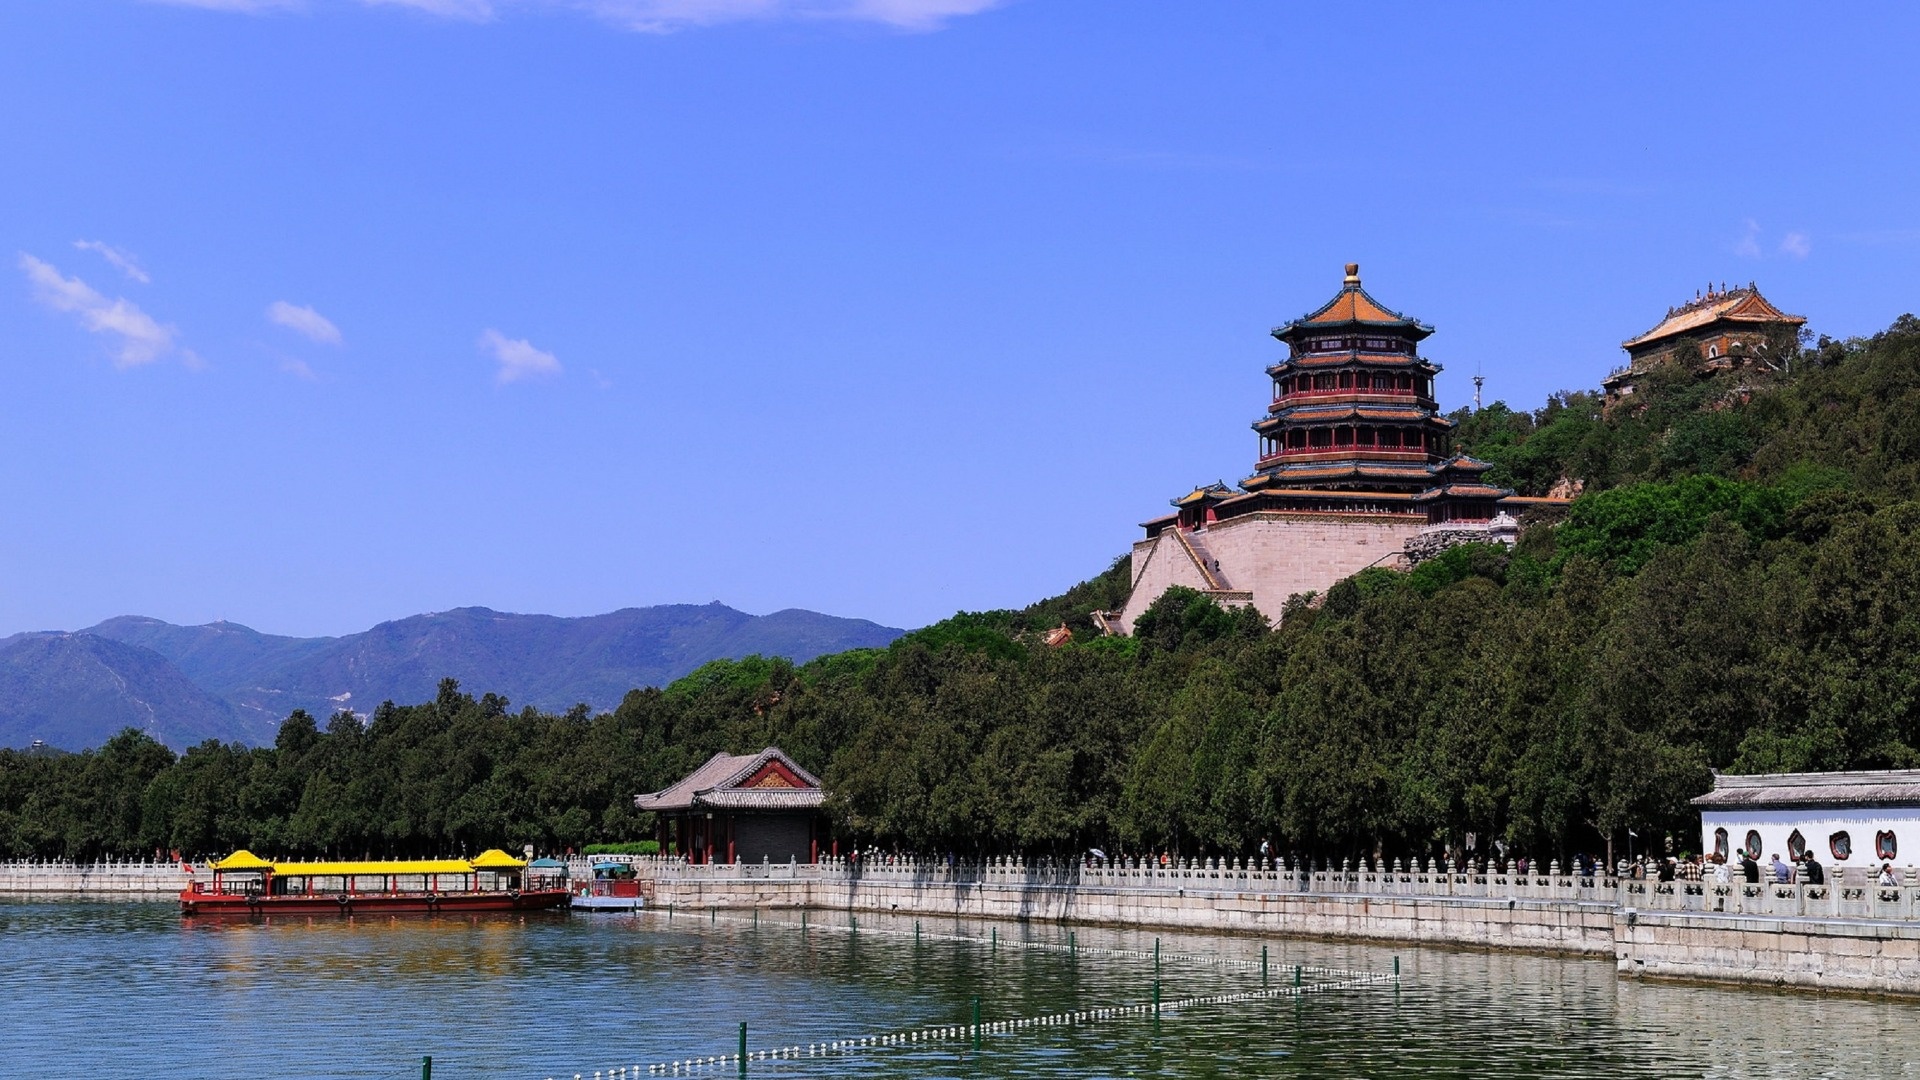 The Summer Palace, Forbidden City tour, Temple of Heaven, Unforgettable day, 1920x1080 Full HD Desktop